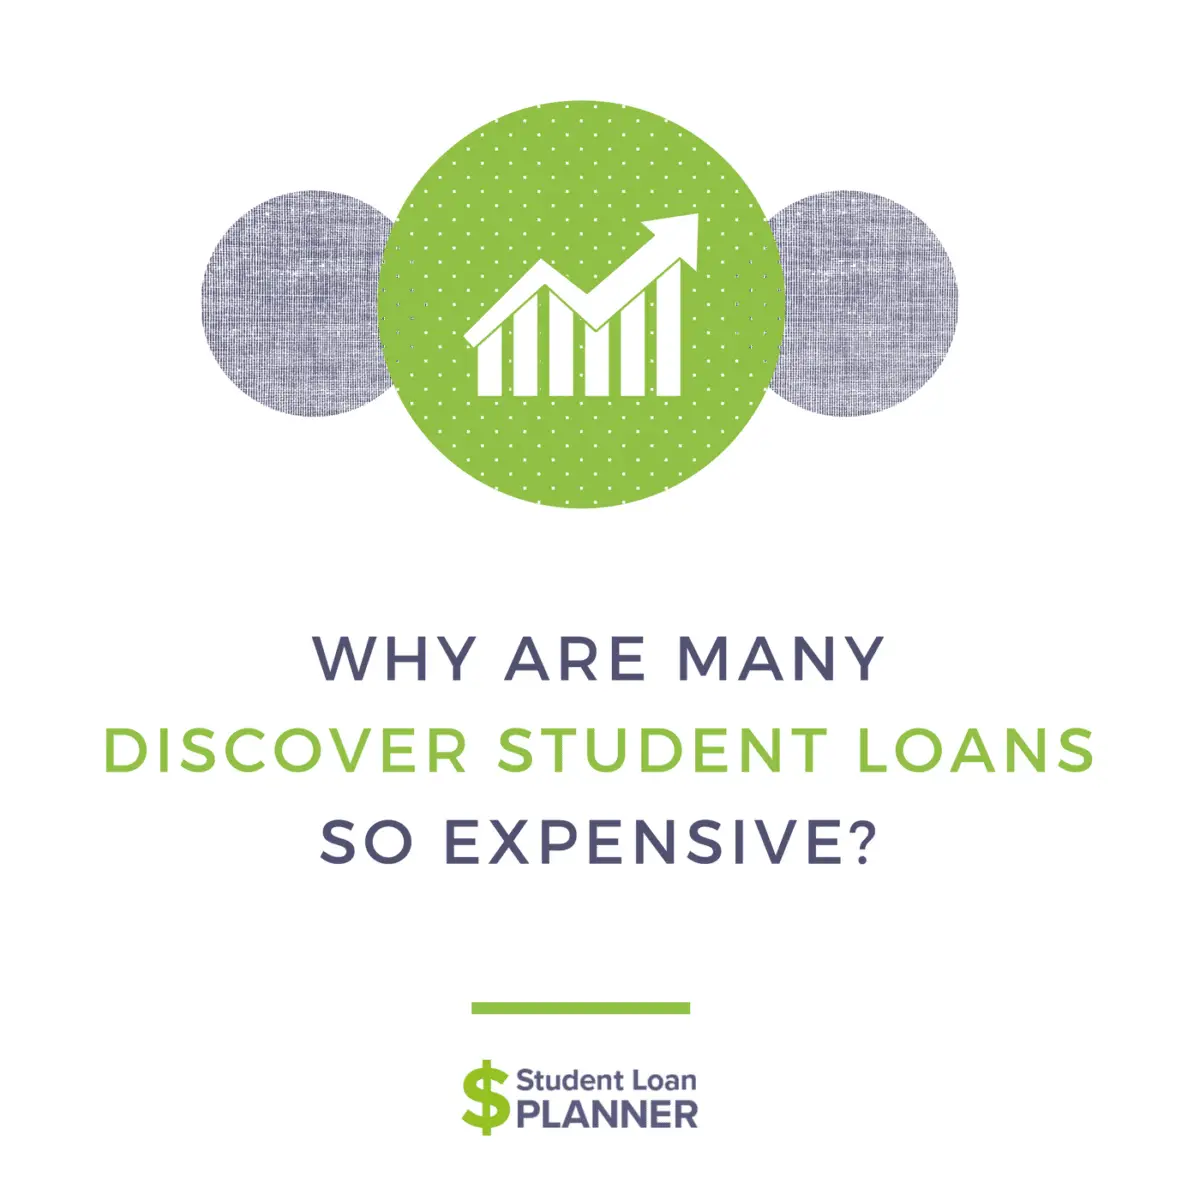 Discover Student Loans Cost Way Too Much